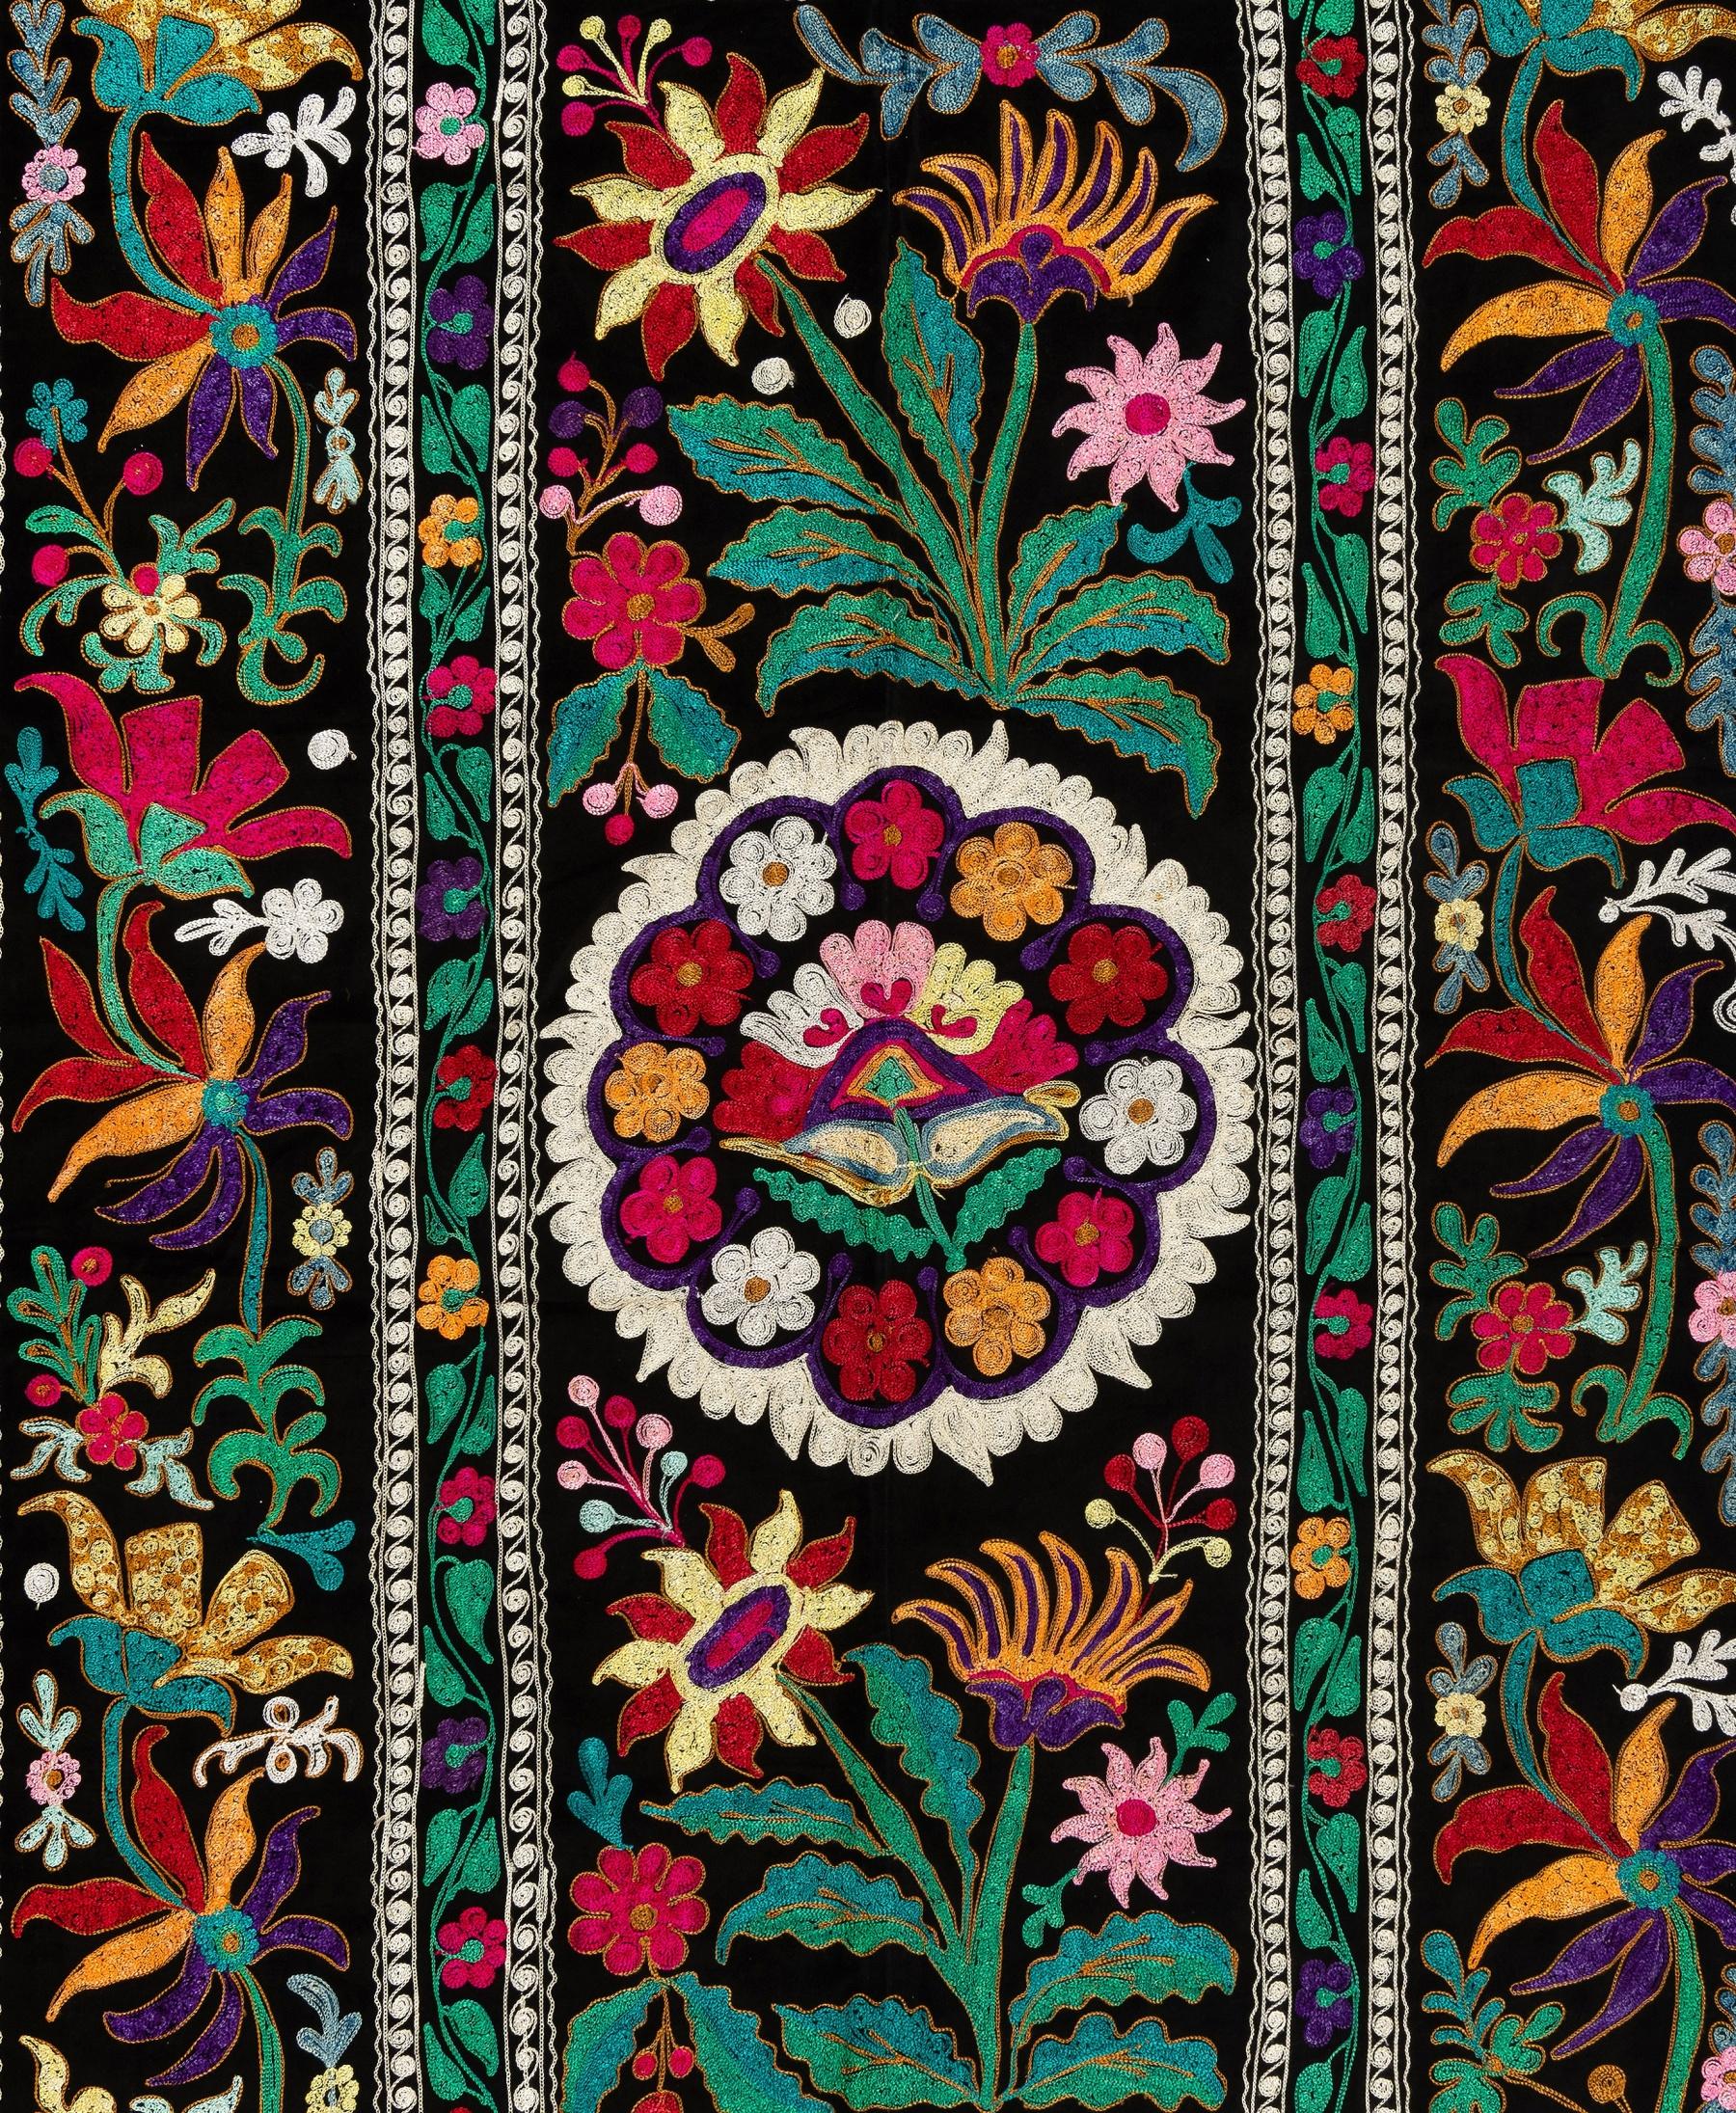 Uzbek 4.3x7.3 Ft Silk Embroidered Suzani Bed Cover, Vintage Colorful Wall Hanging